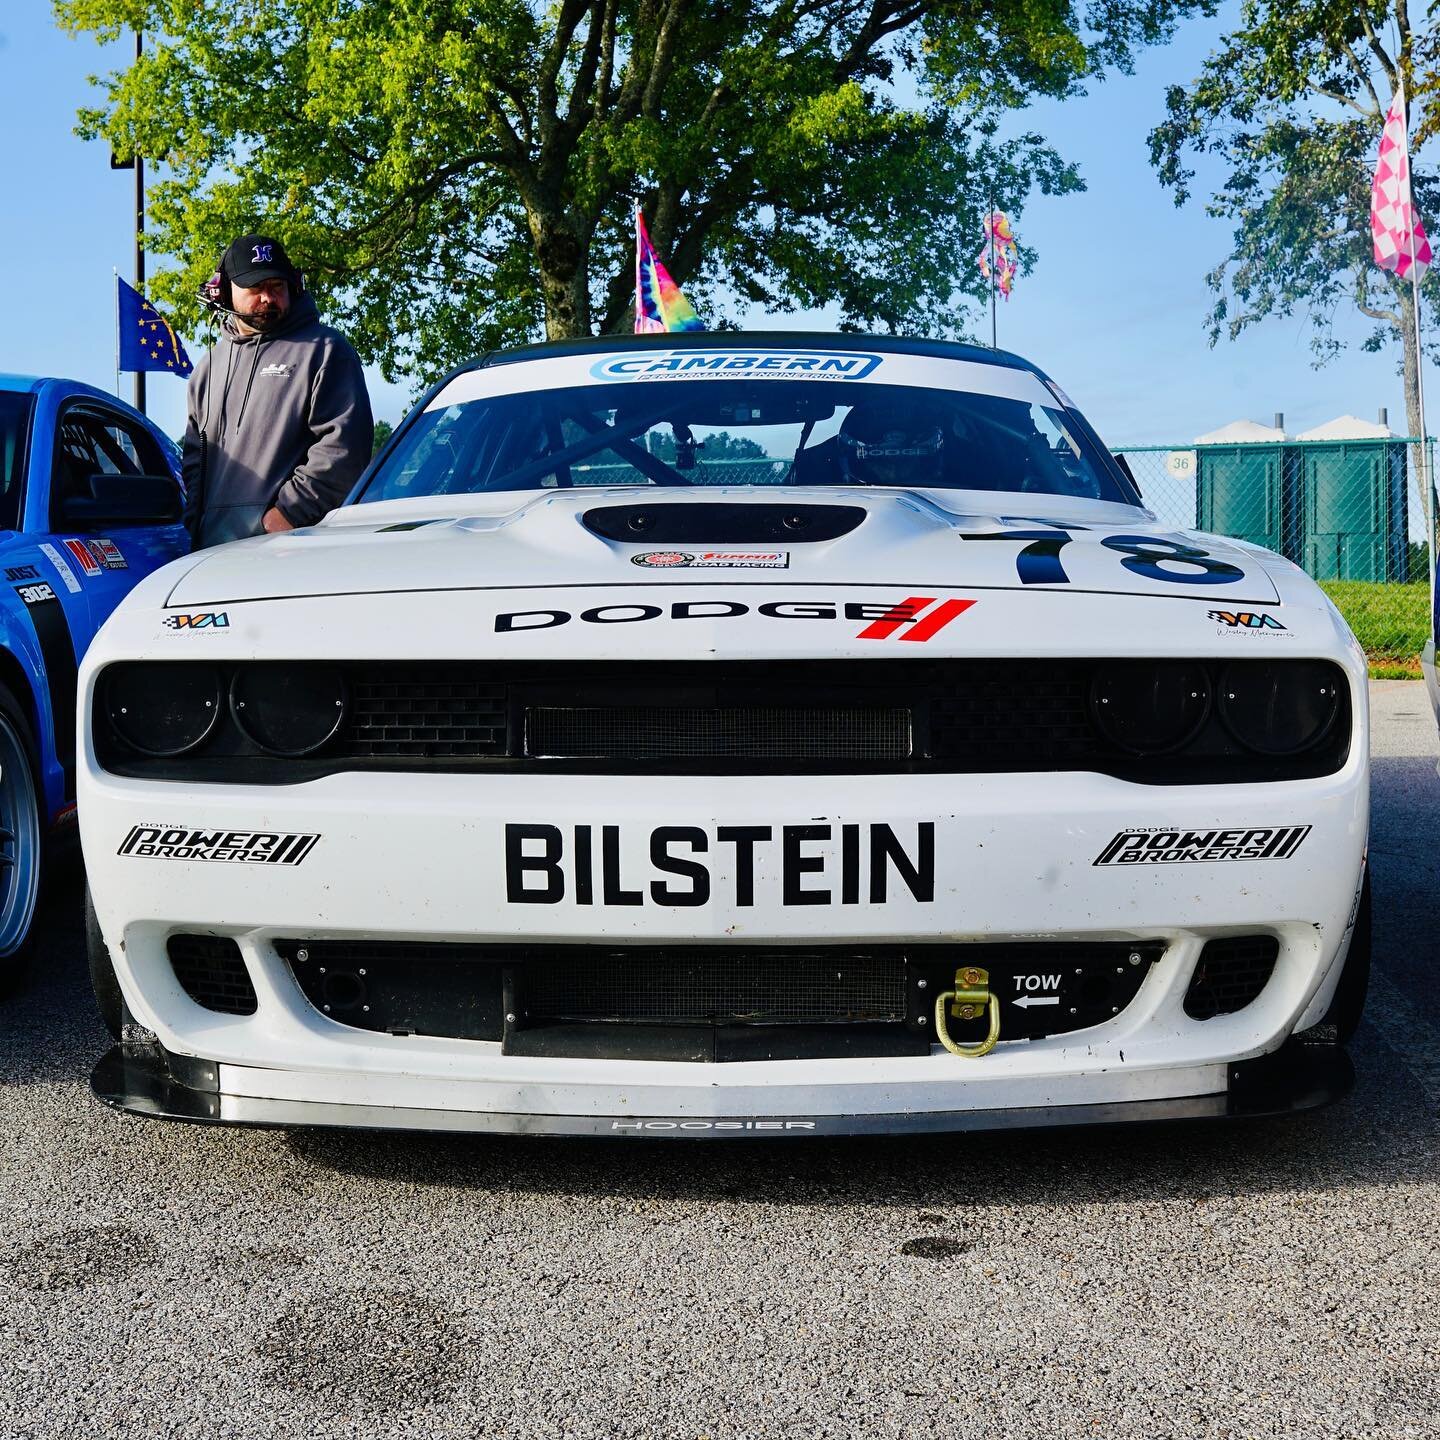 Runoffs Podium! 🥈Clark Cambern was able to capture a silver medal at the SCCA Runoffs at @virnow in the American Sedan class! He fell back to 4th at the start, but had great long run speed in his @wesleymotorsport Dodge Challenger and was able to wo